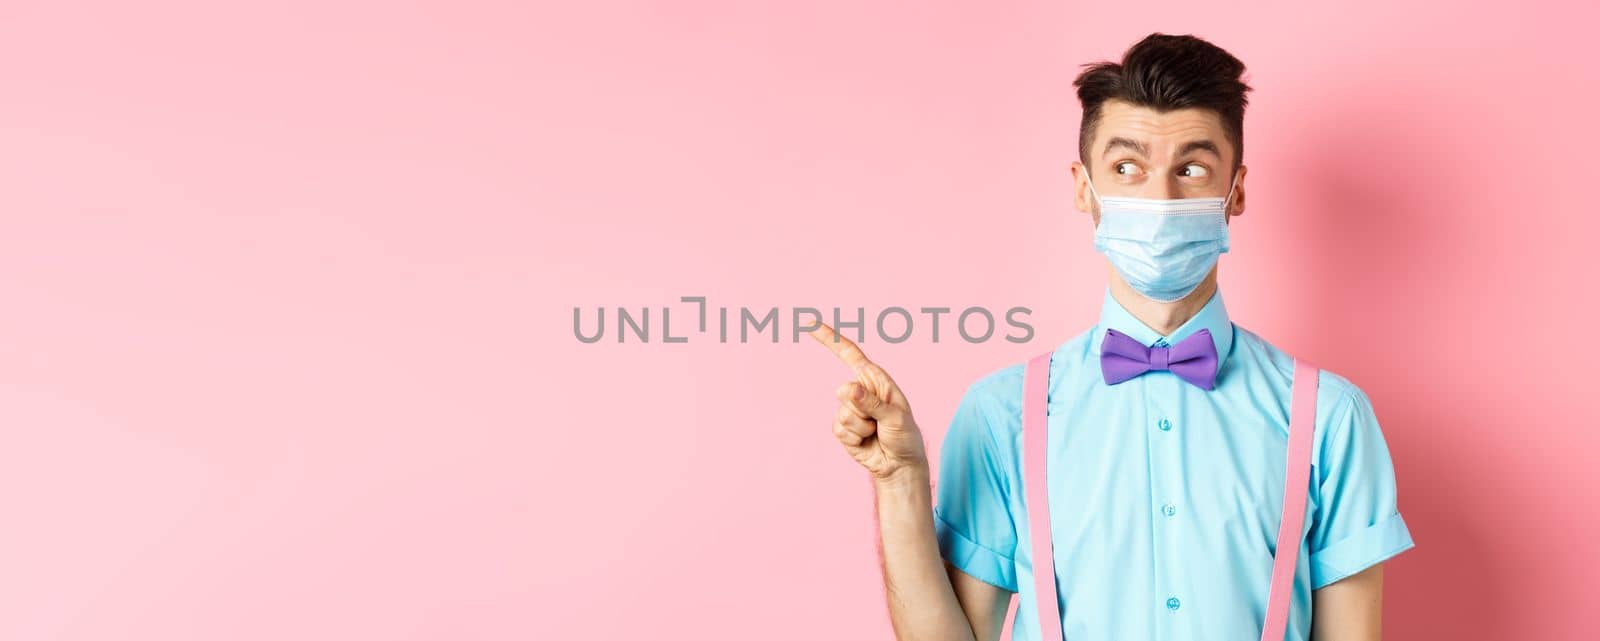 Covid-19, pandemic and health concept. Funny man in bow-tie and medical mask pointing finger left, looking aside curious, showing logo, standing on pink background.